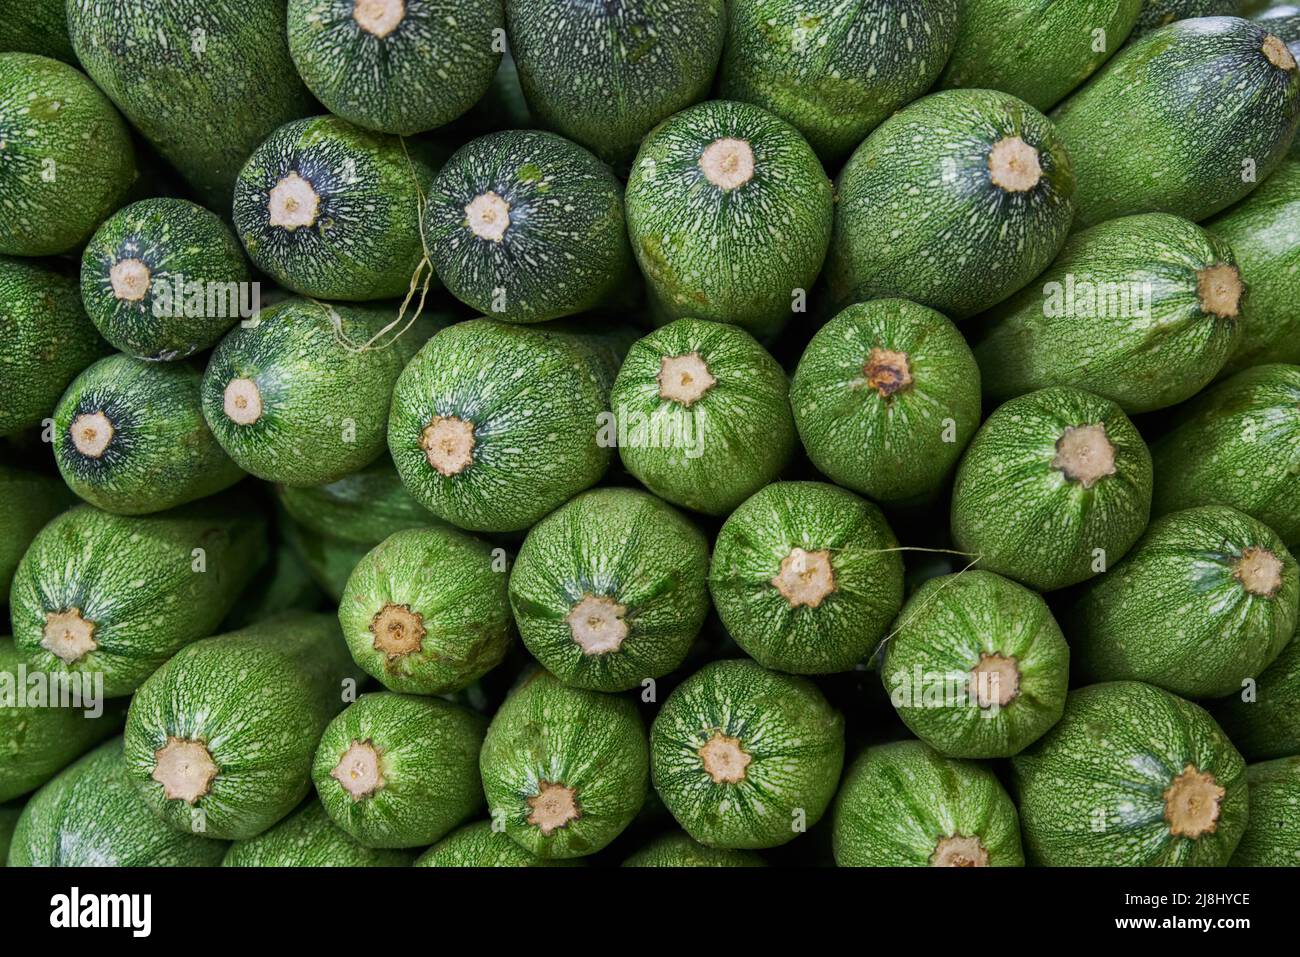 Stacked zucchini on a shelf for sale within a market Stock Photo